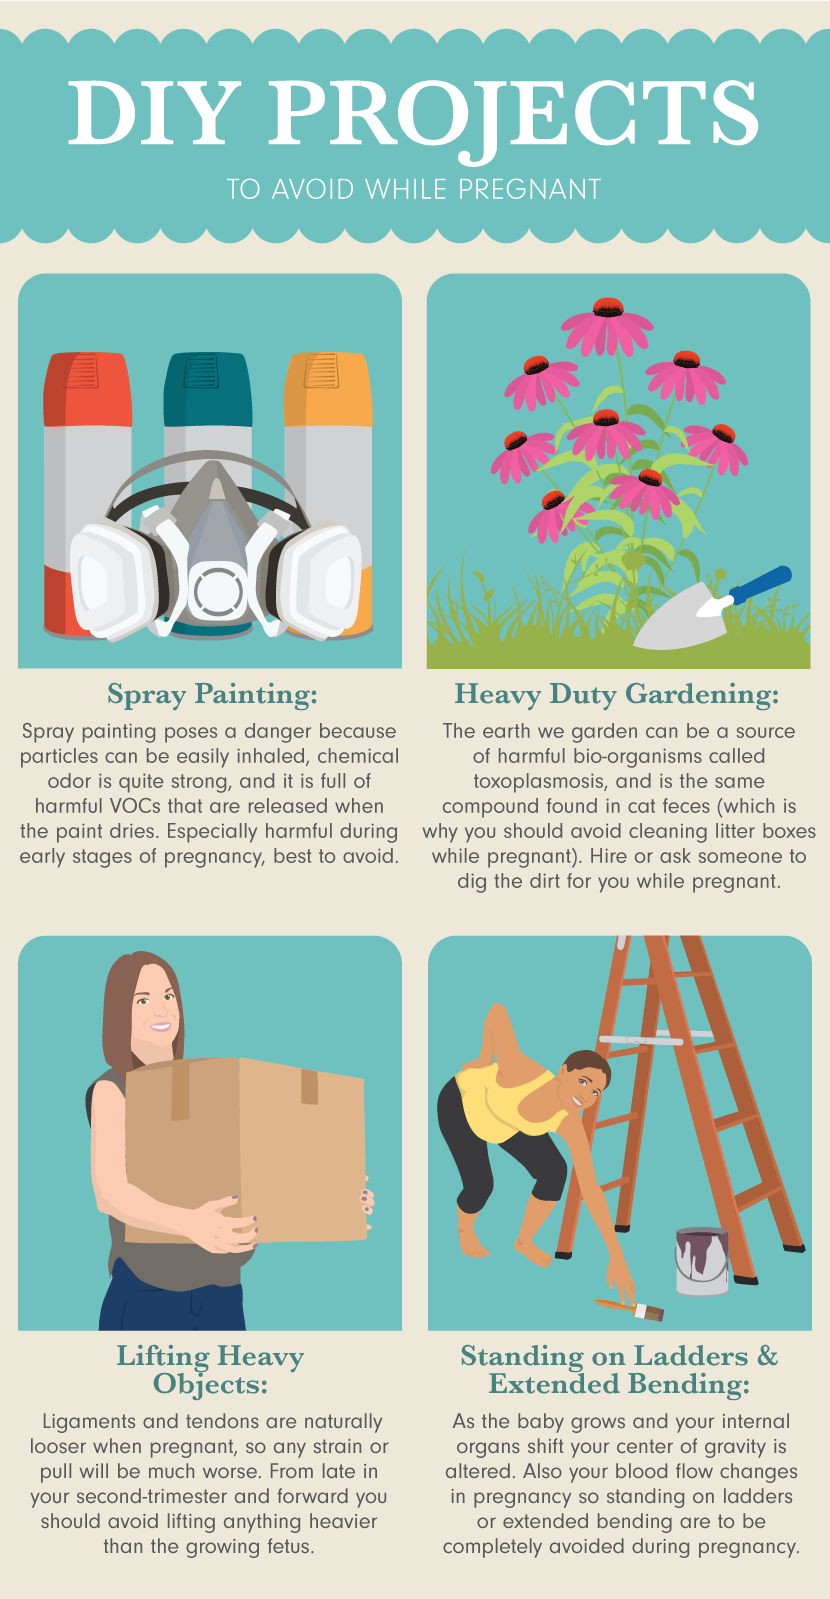 DIY Projects to Avoid While Pregnant